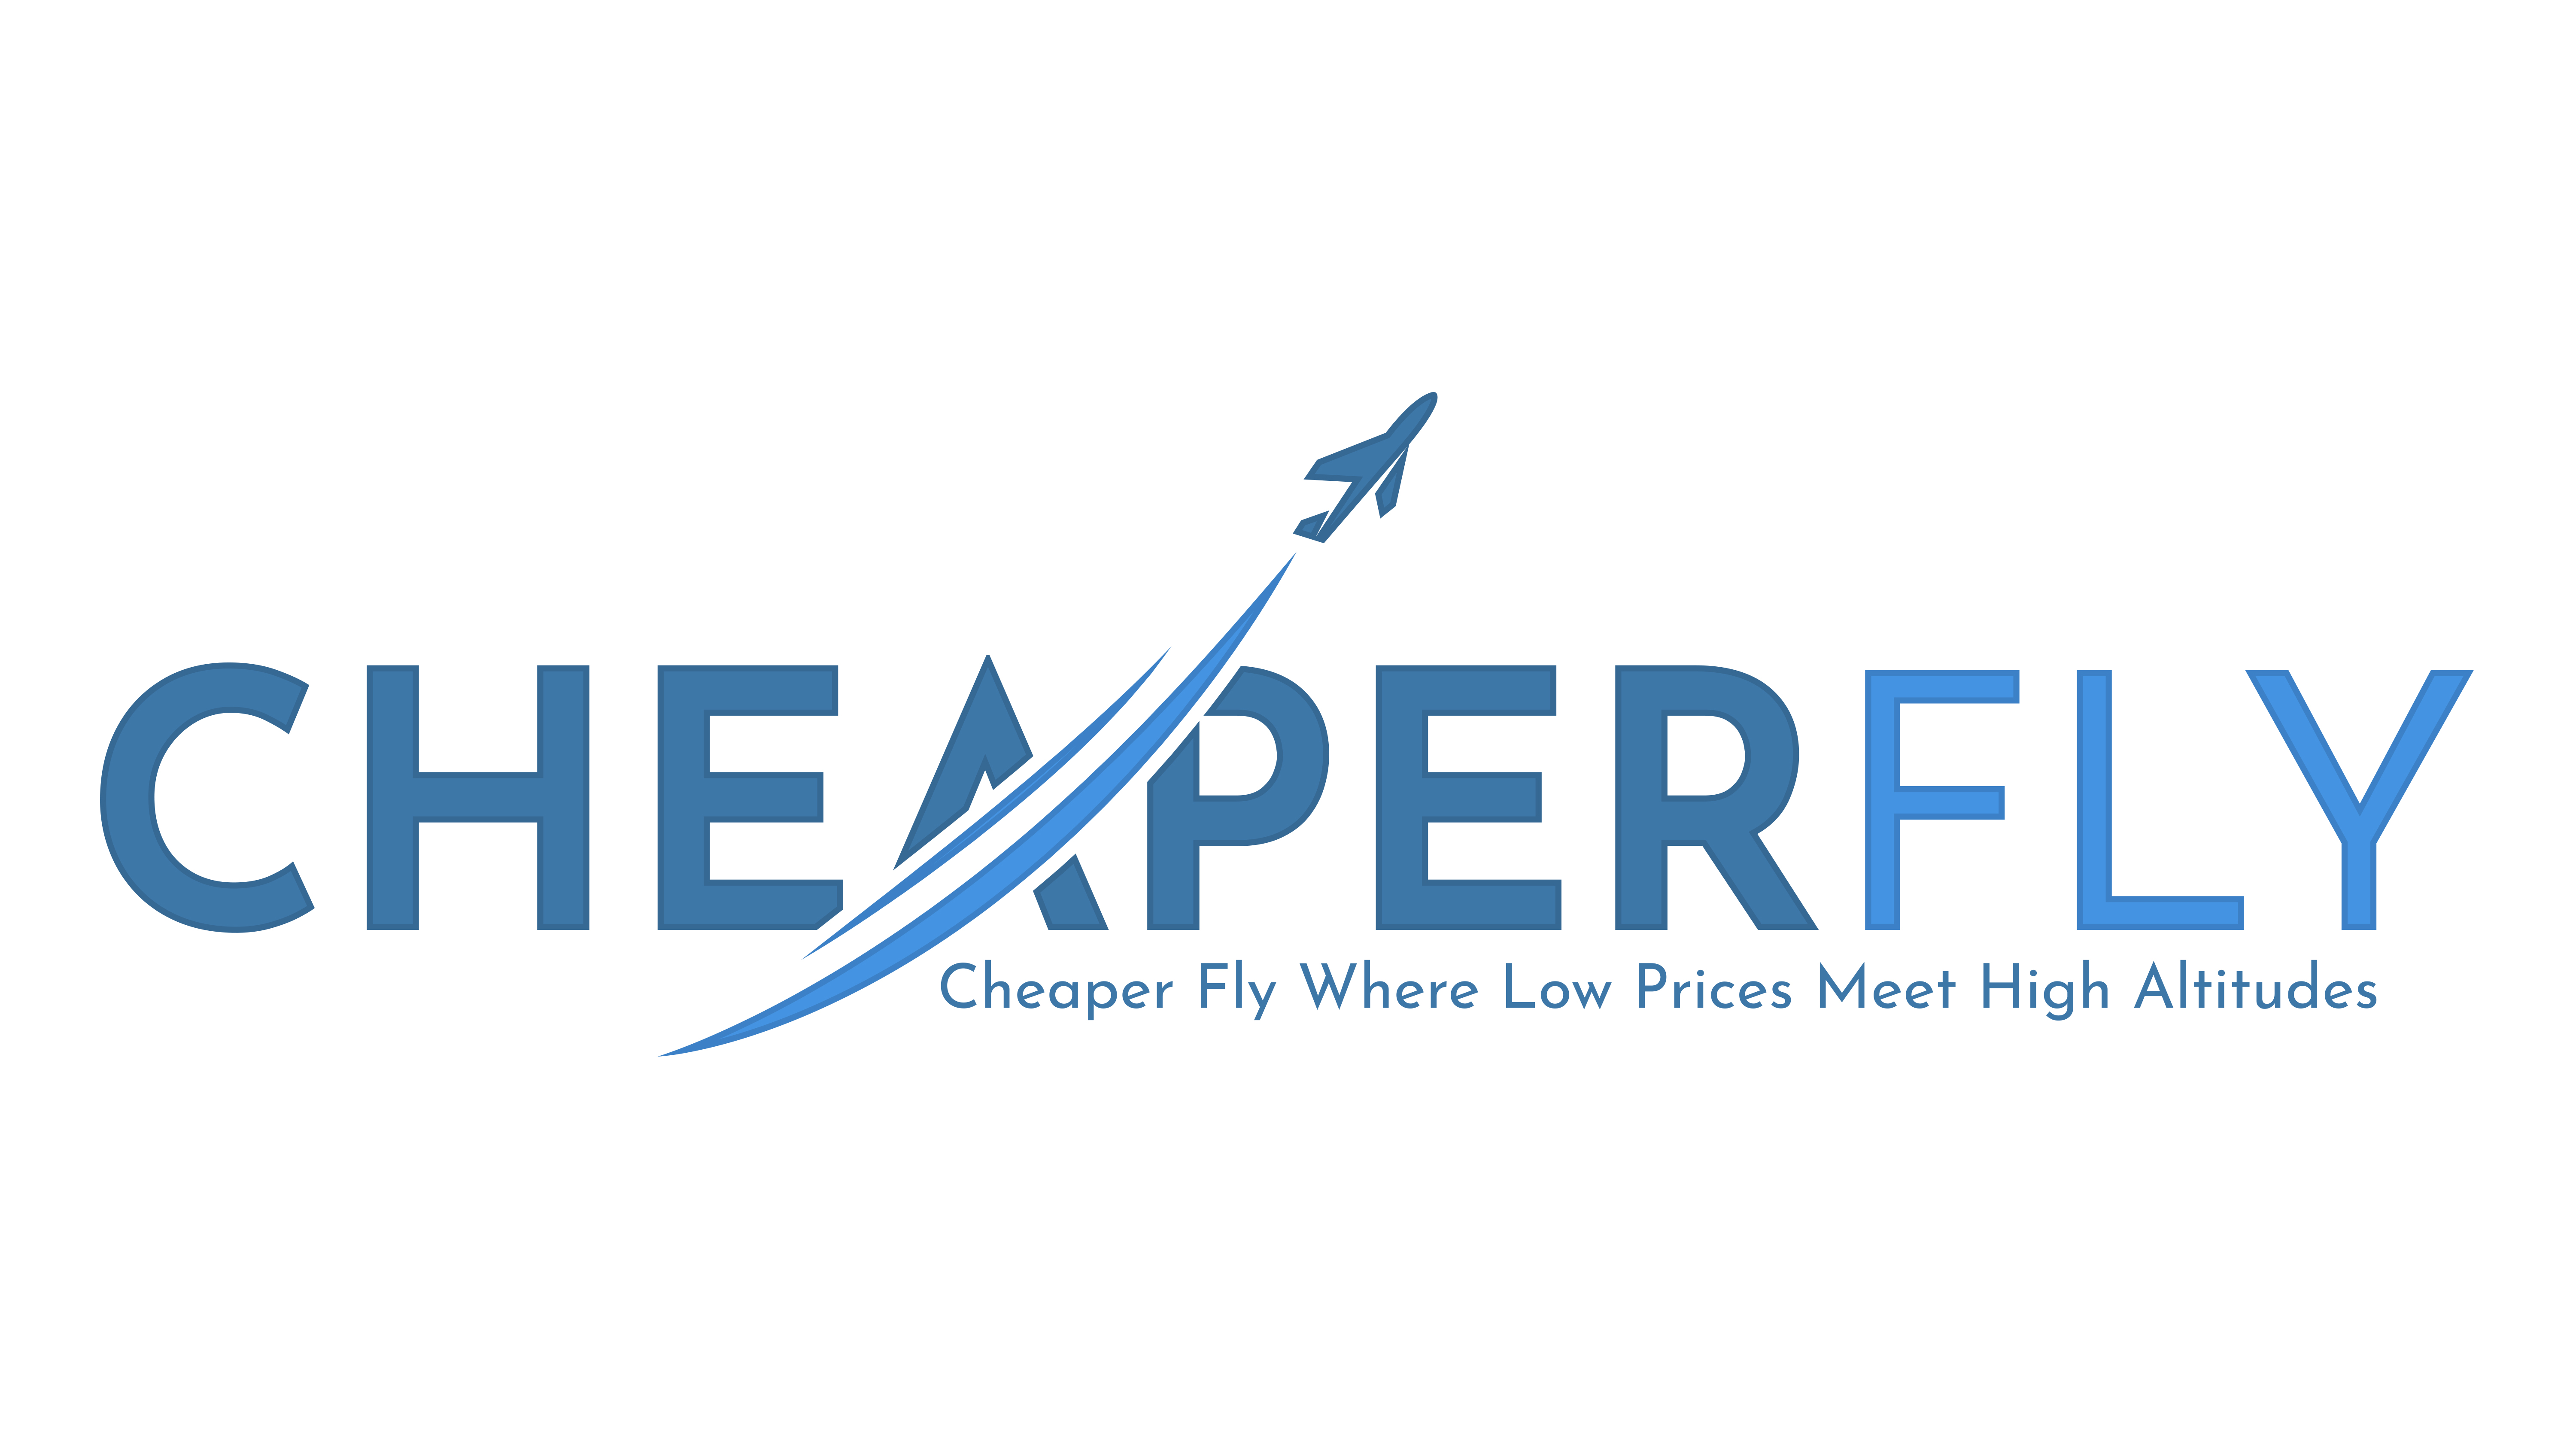 Cheaper Fly - Where Low Prices Meet High Altitudes